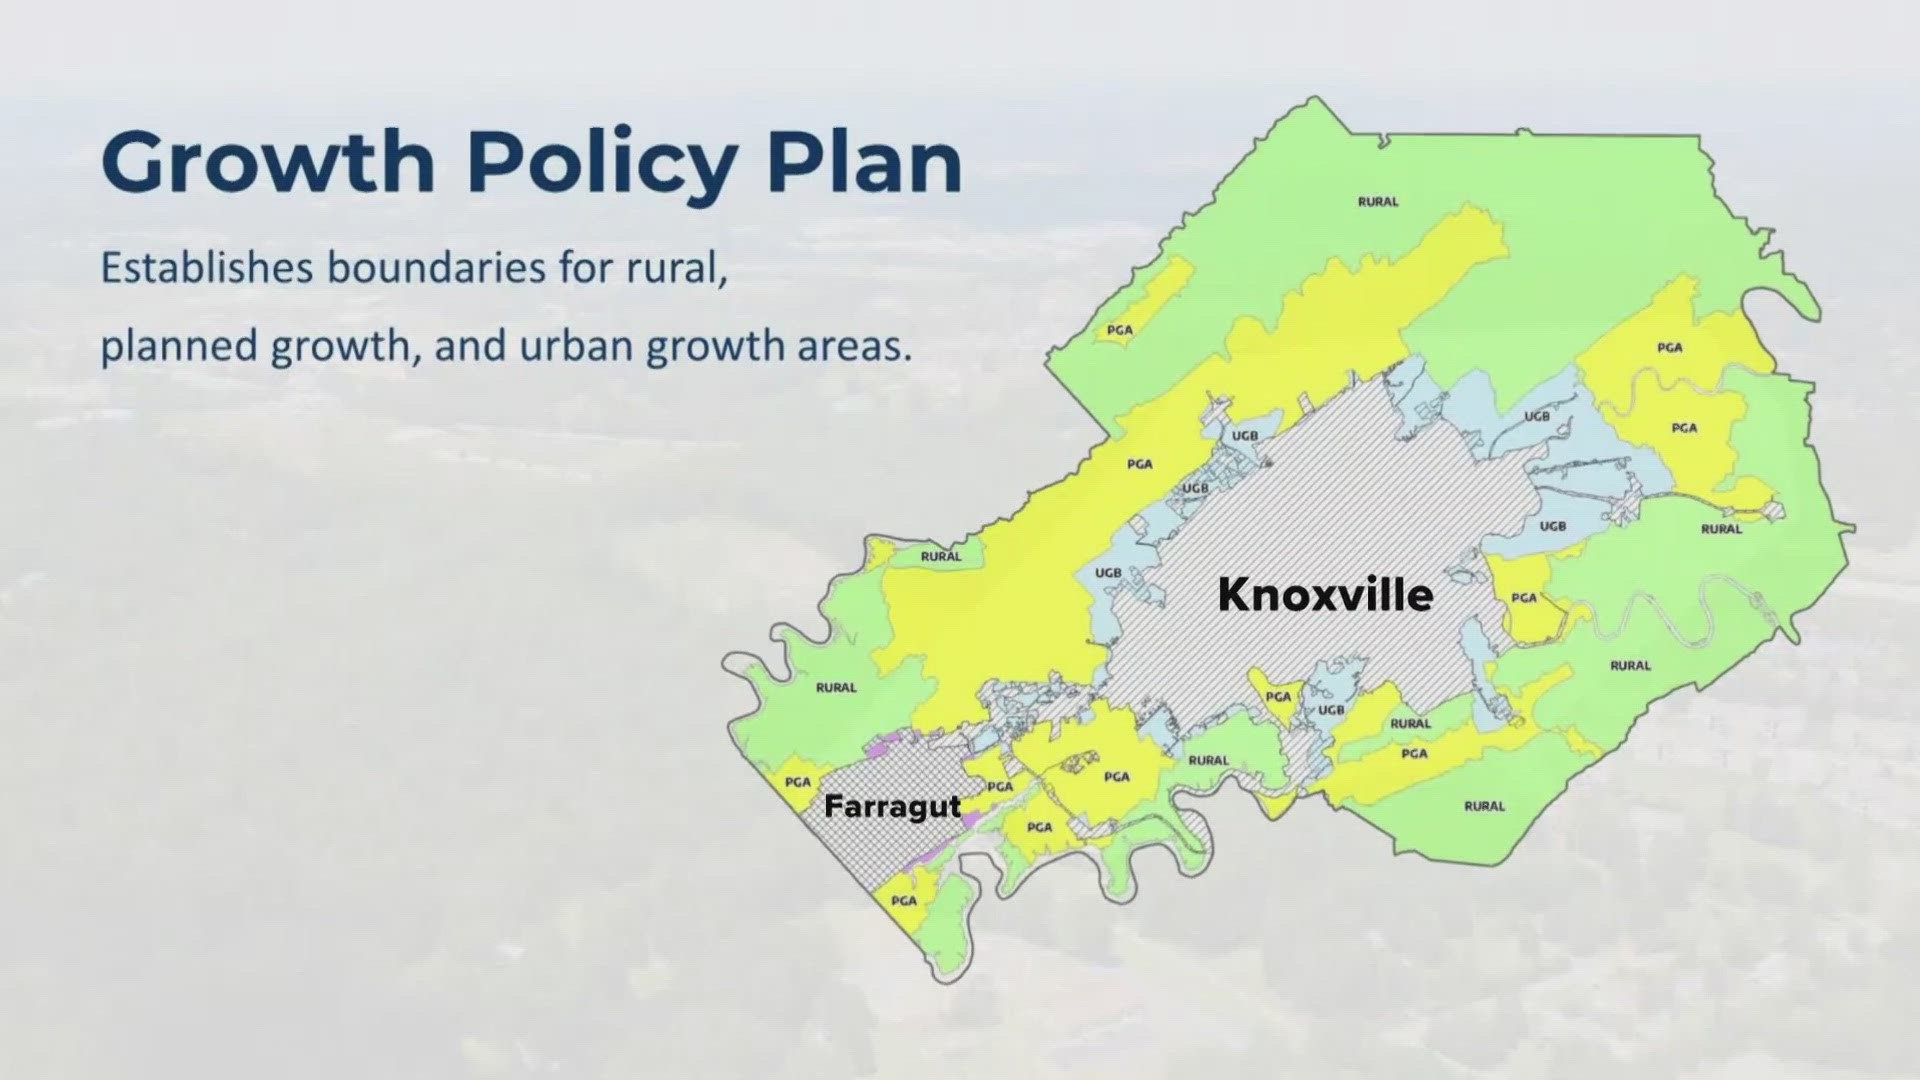 Farragut was the final entity that needs to approve the plan before it can be implemented.